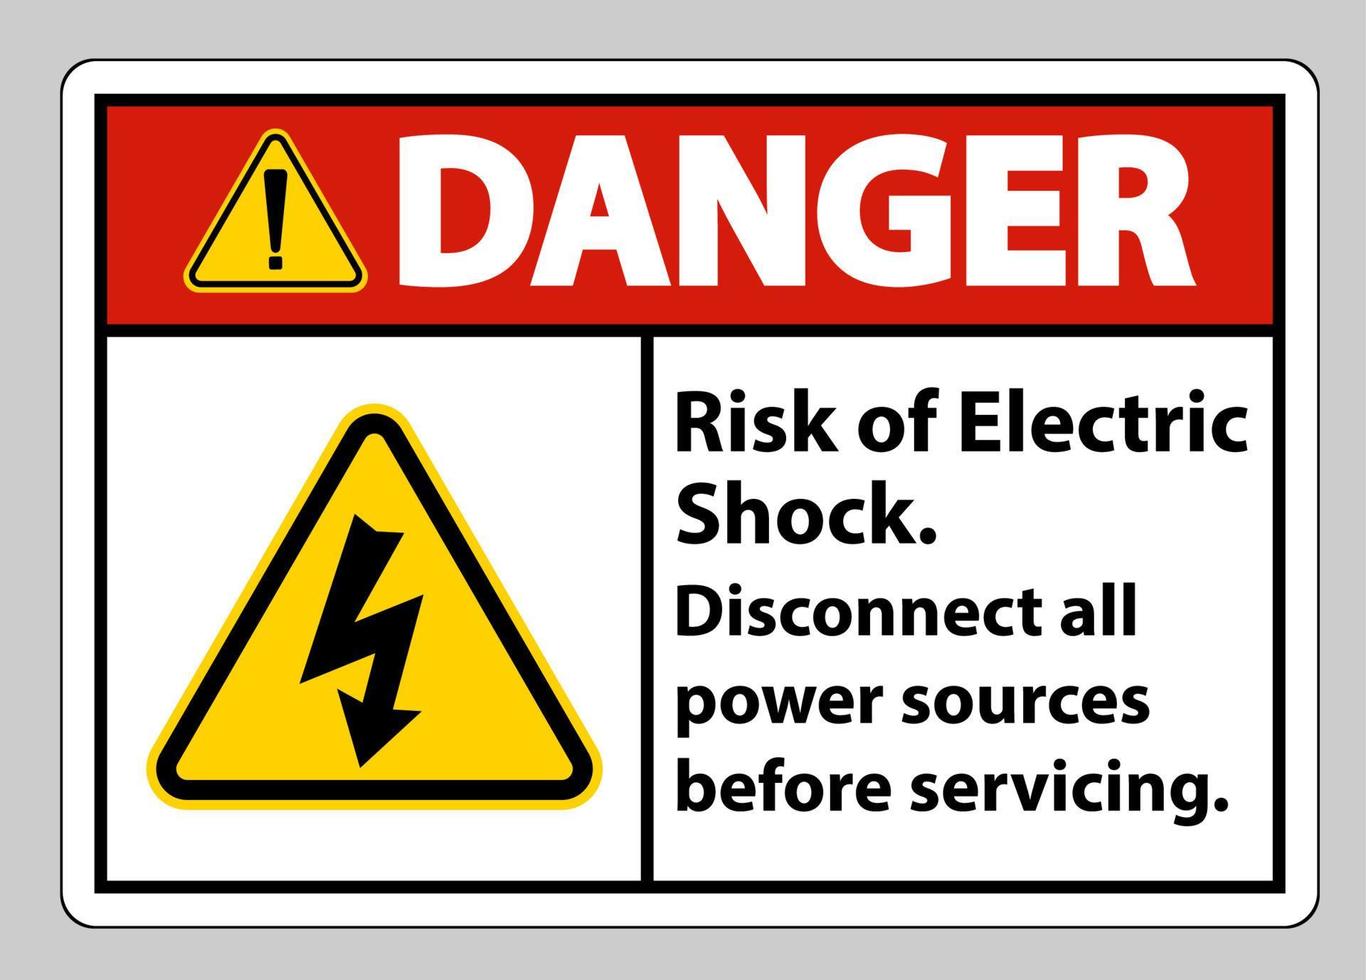 Danger Risk of electric shock Symbol Sign Isolate on White Background vector